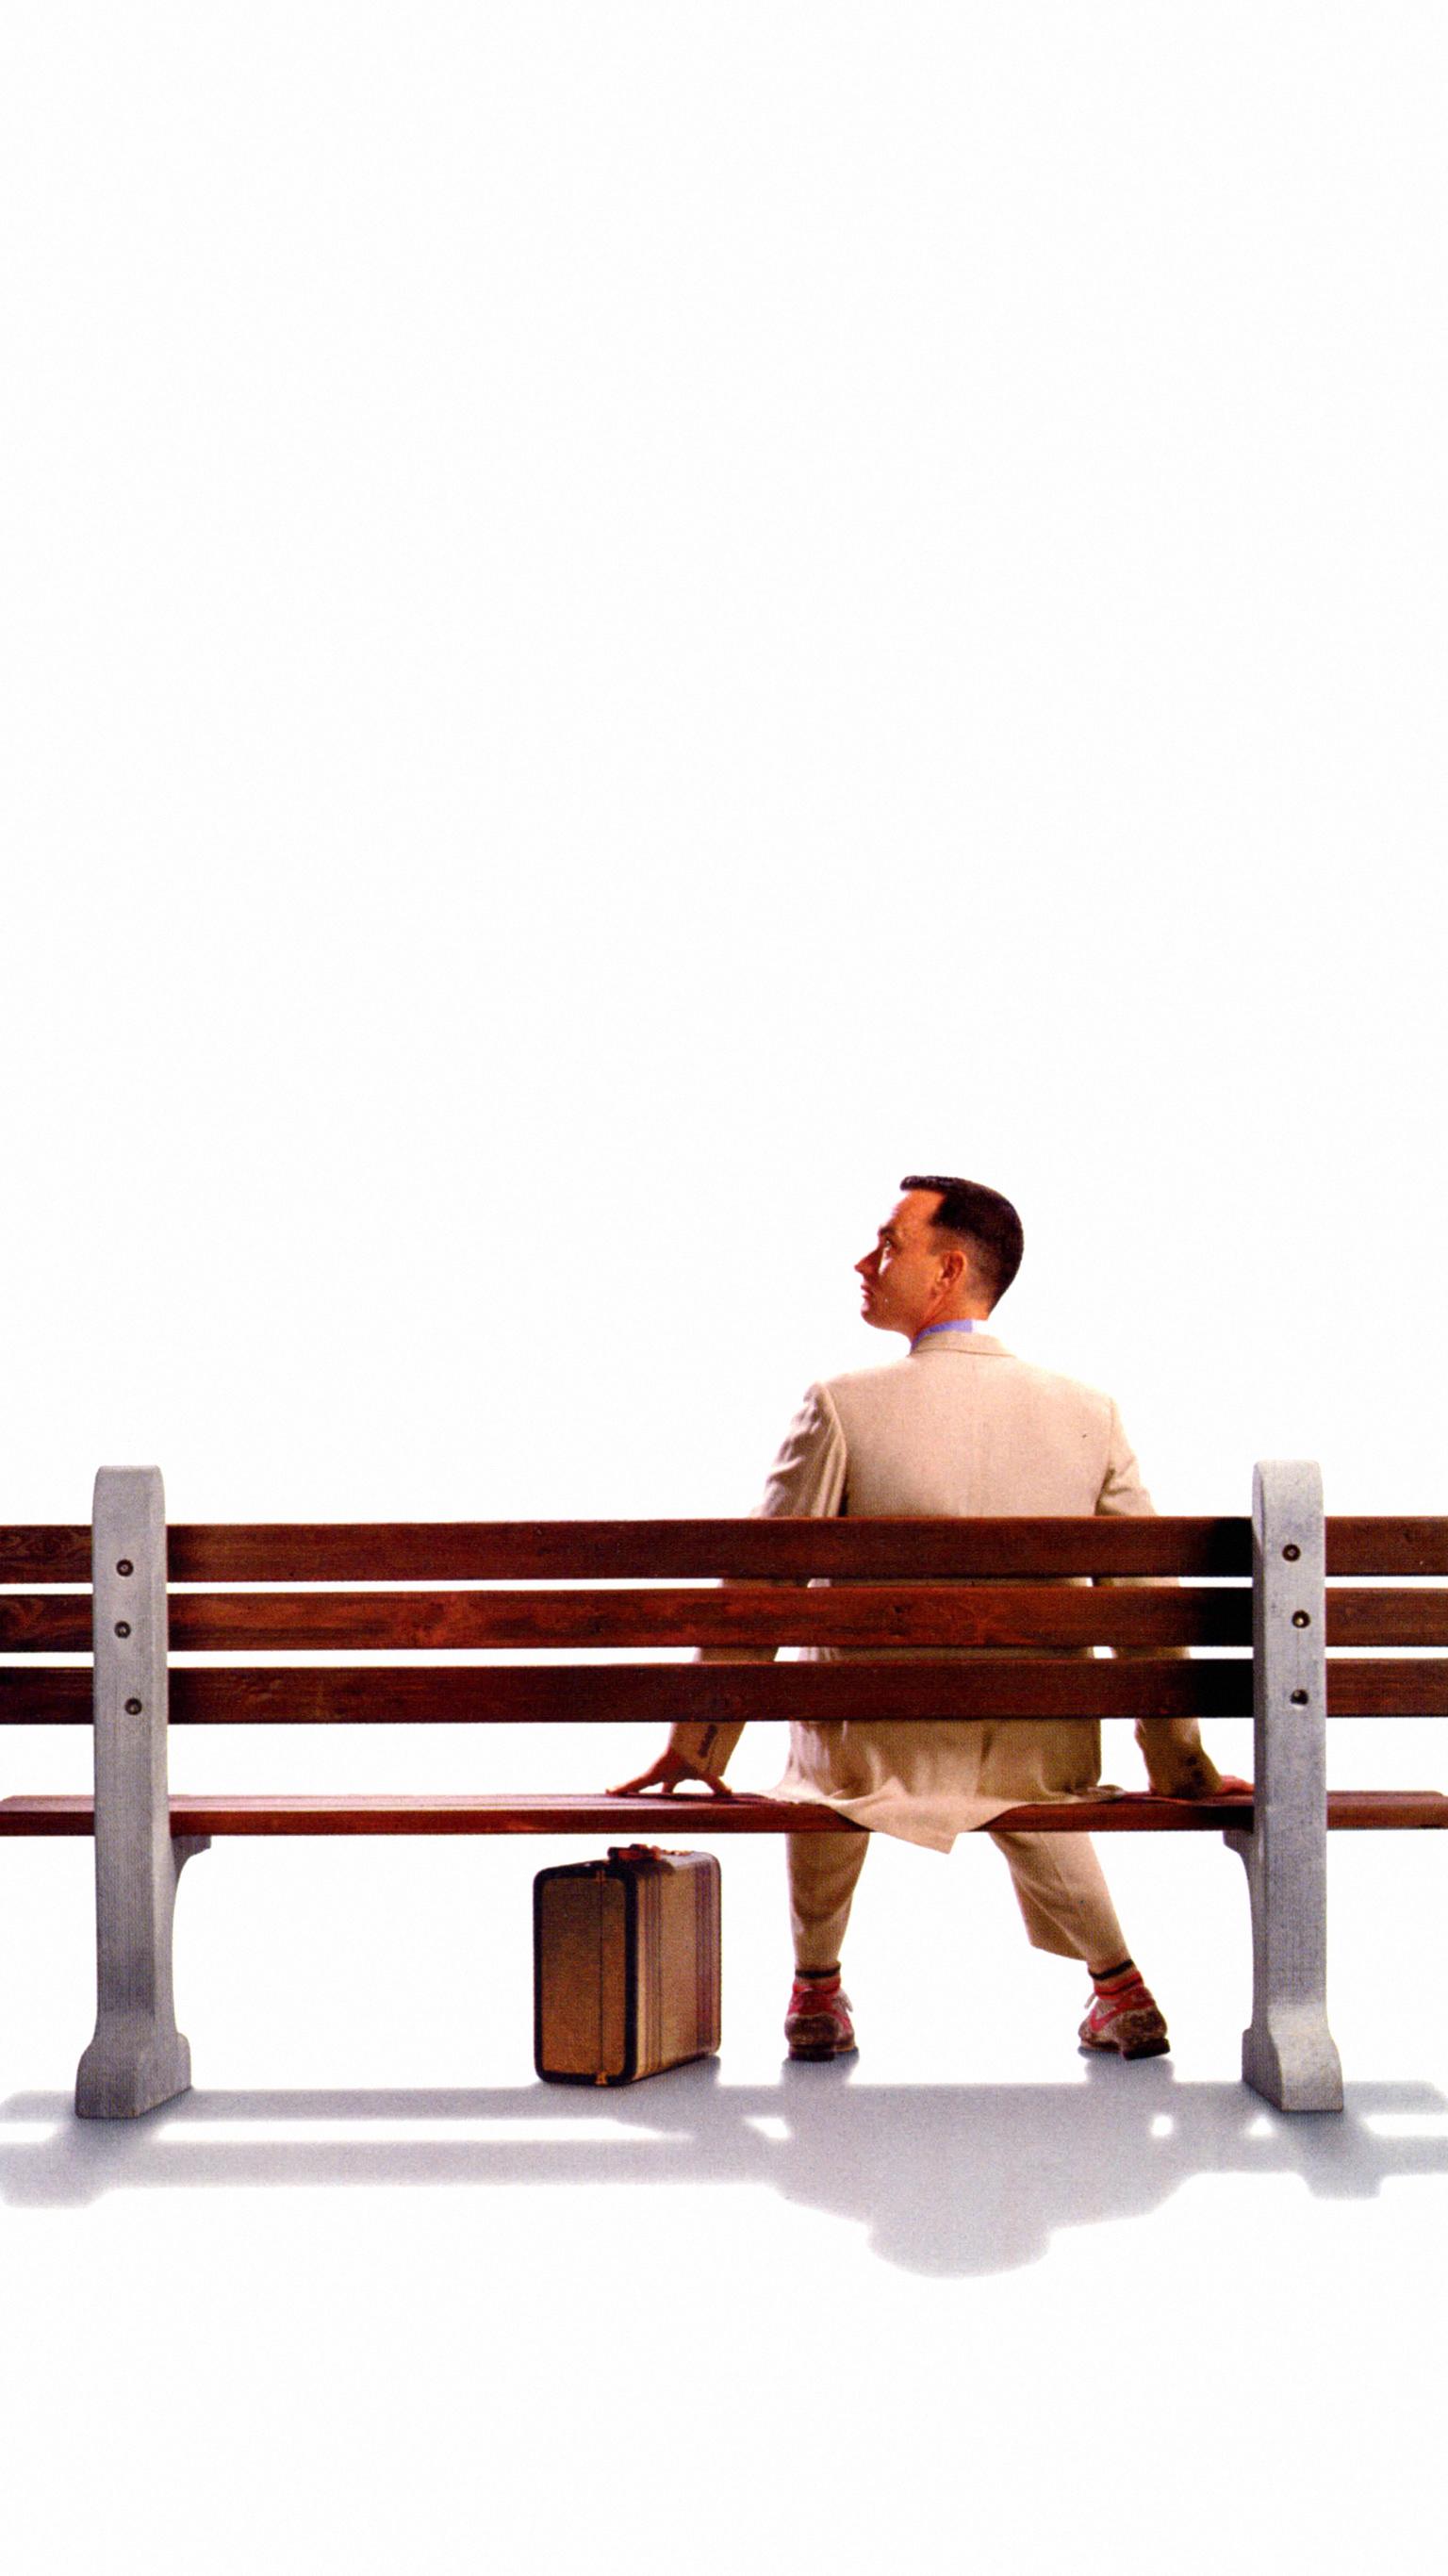 Forrest Gump quote iPhone wallpaper  Forrest gump quotes Forrest gump  Comedy movie quotes